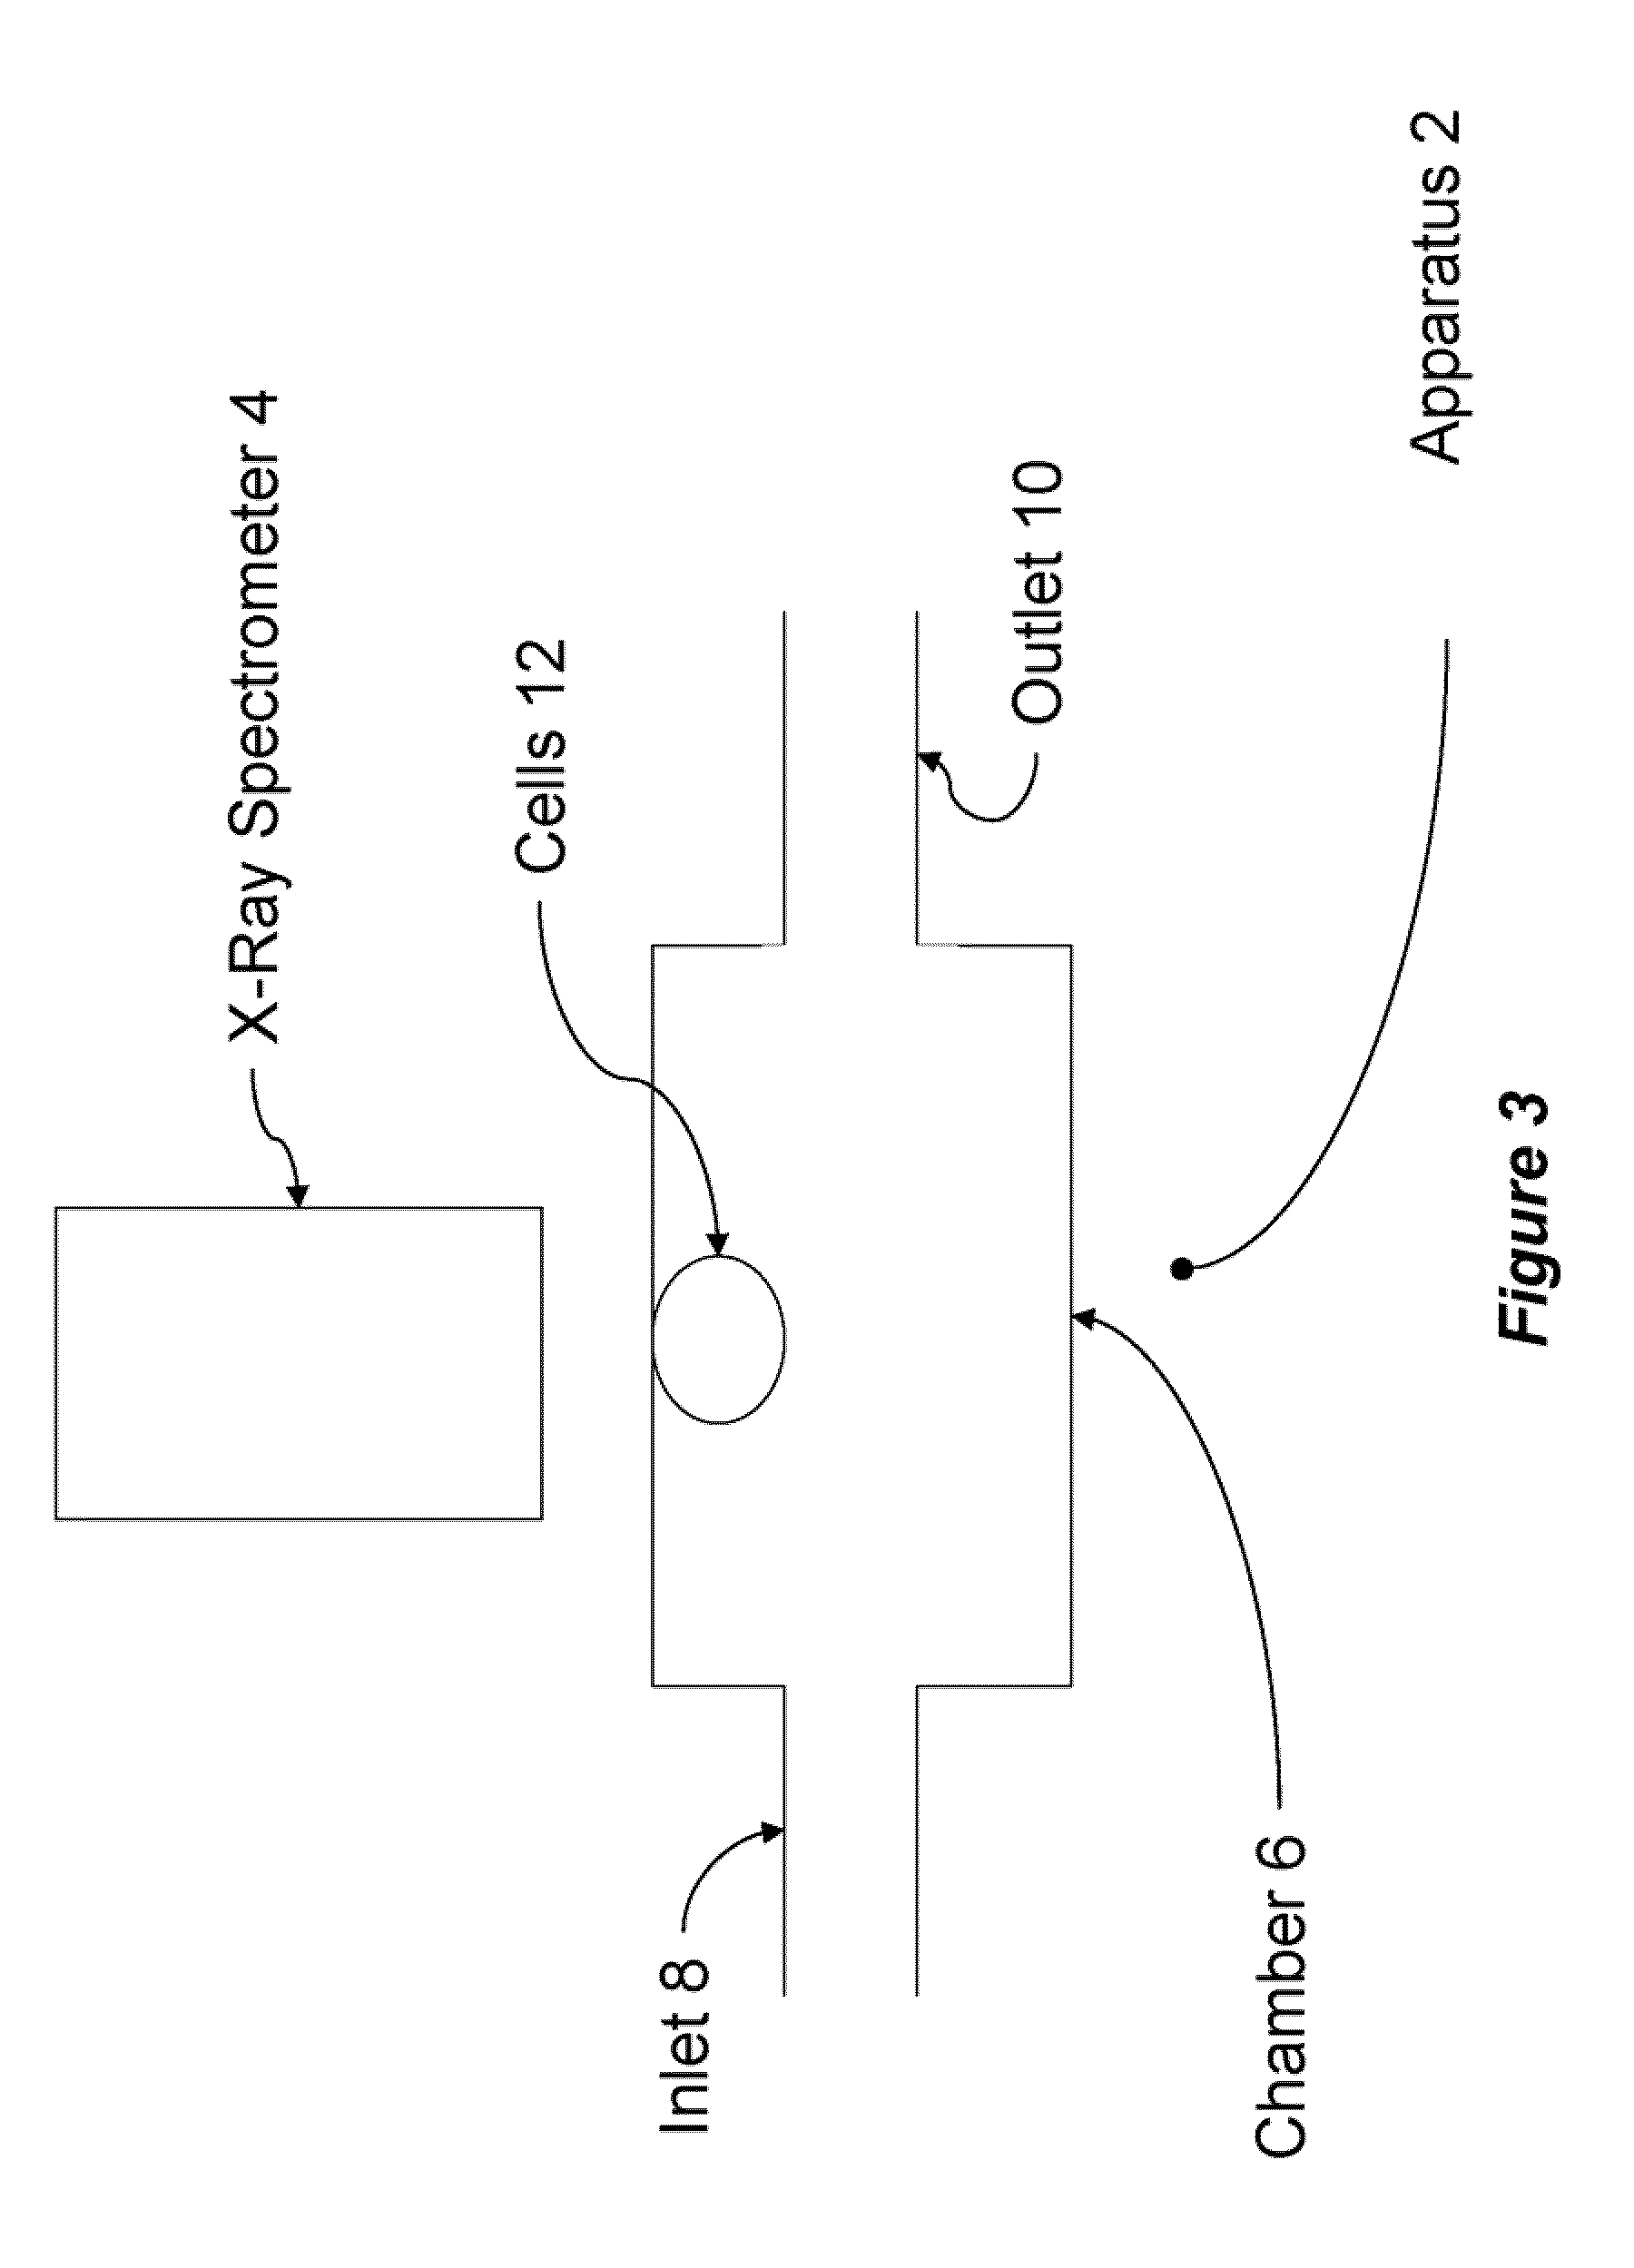 Method and apparatus for measuring analyte transport across barriers using x-ray fluorescence